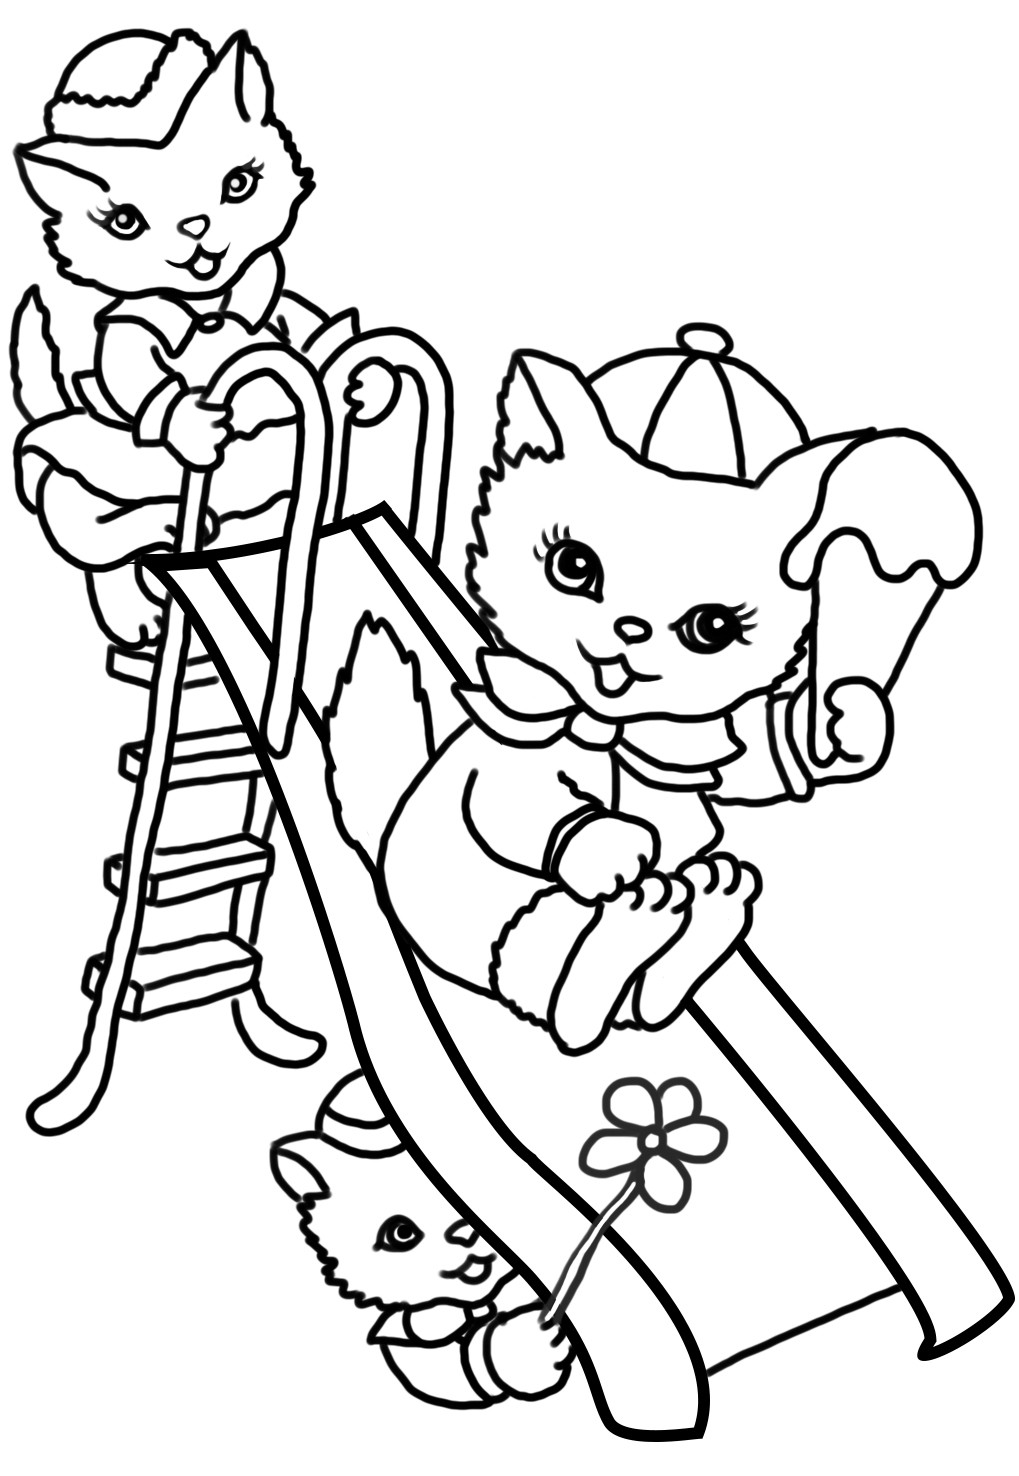 Summer Coloring Pages For Kids
 Summer Coloring Pages to Print